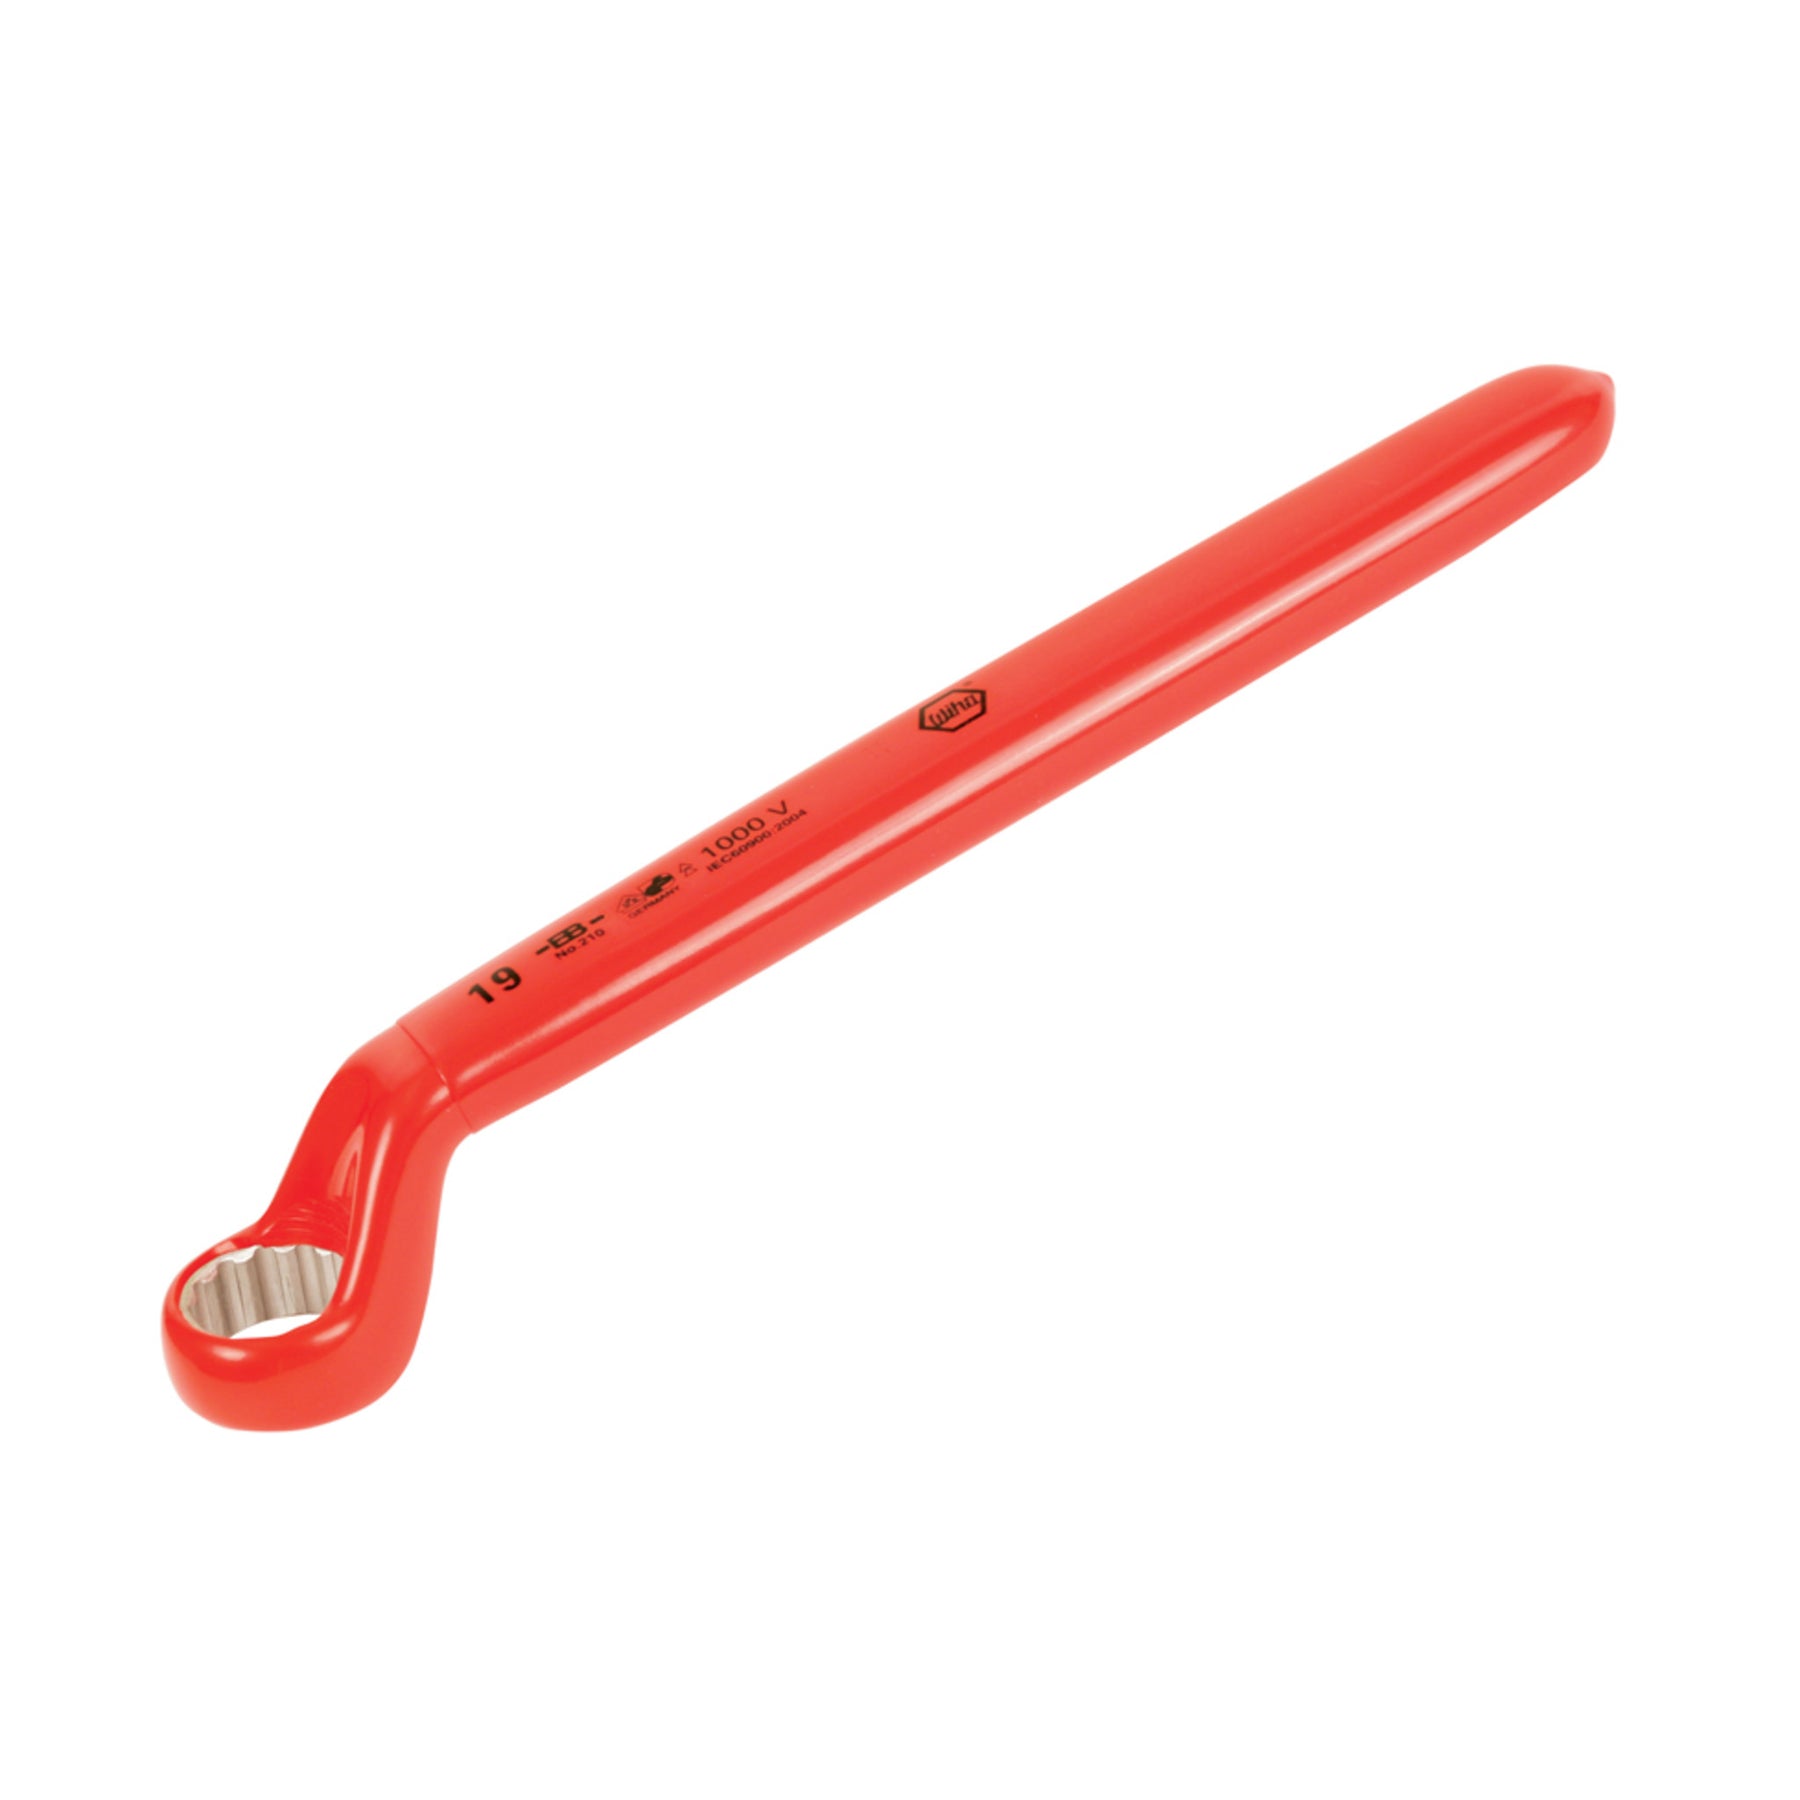 Insulated Deep Offset Wrench 24mm